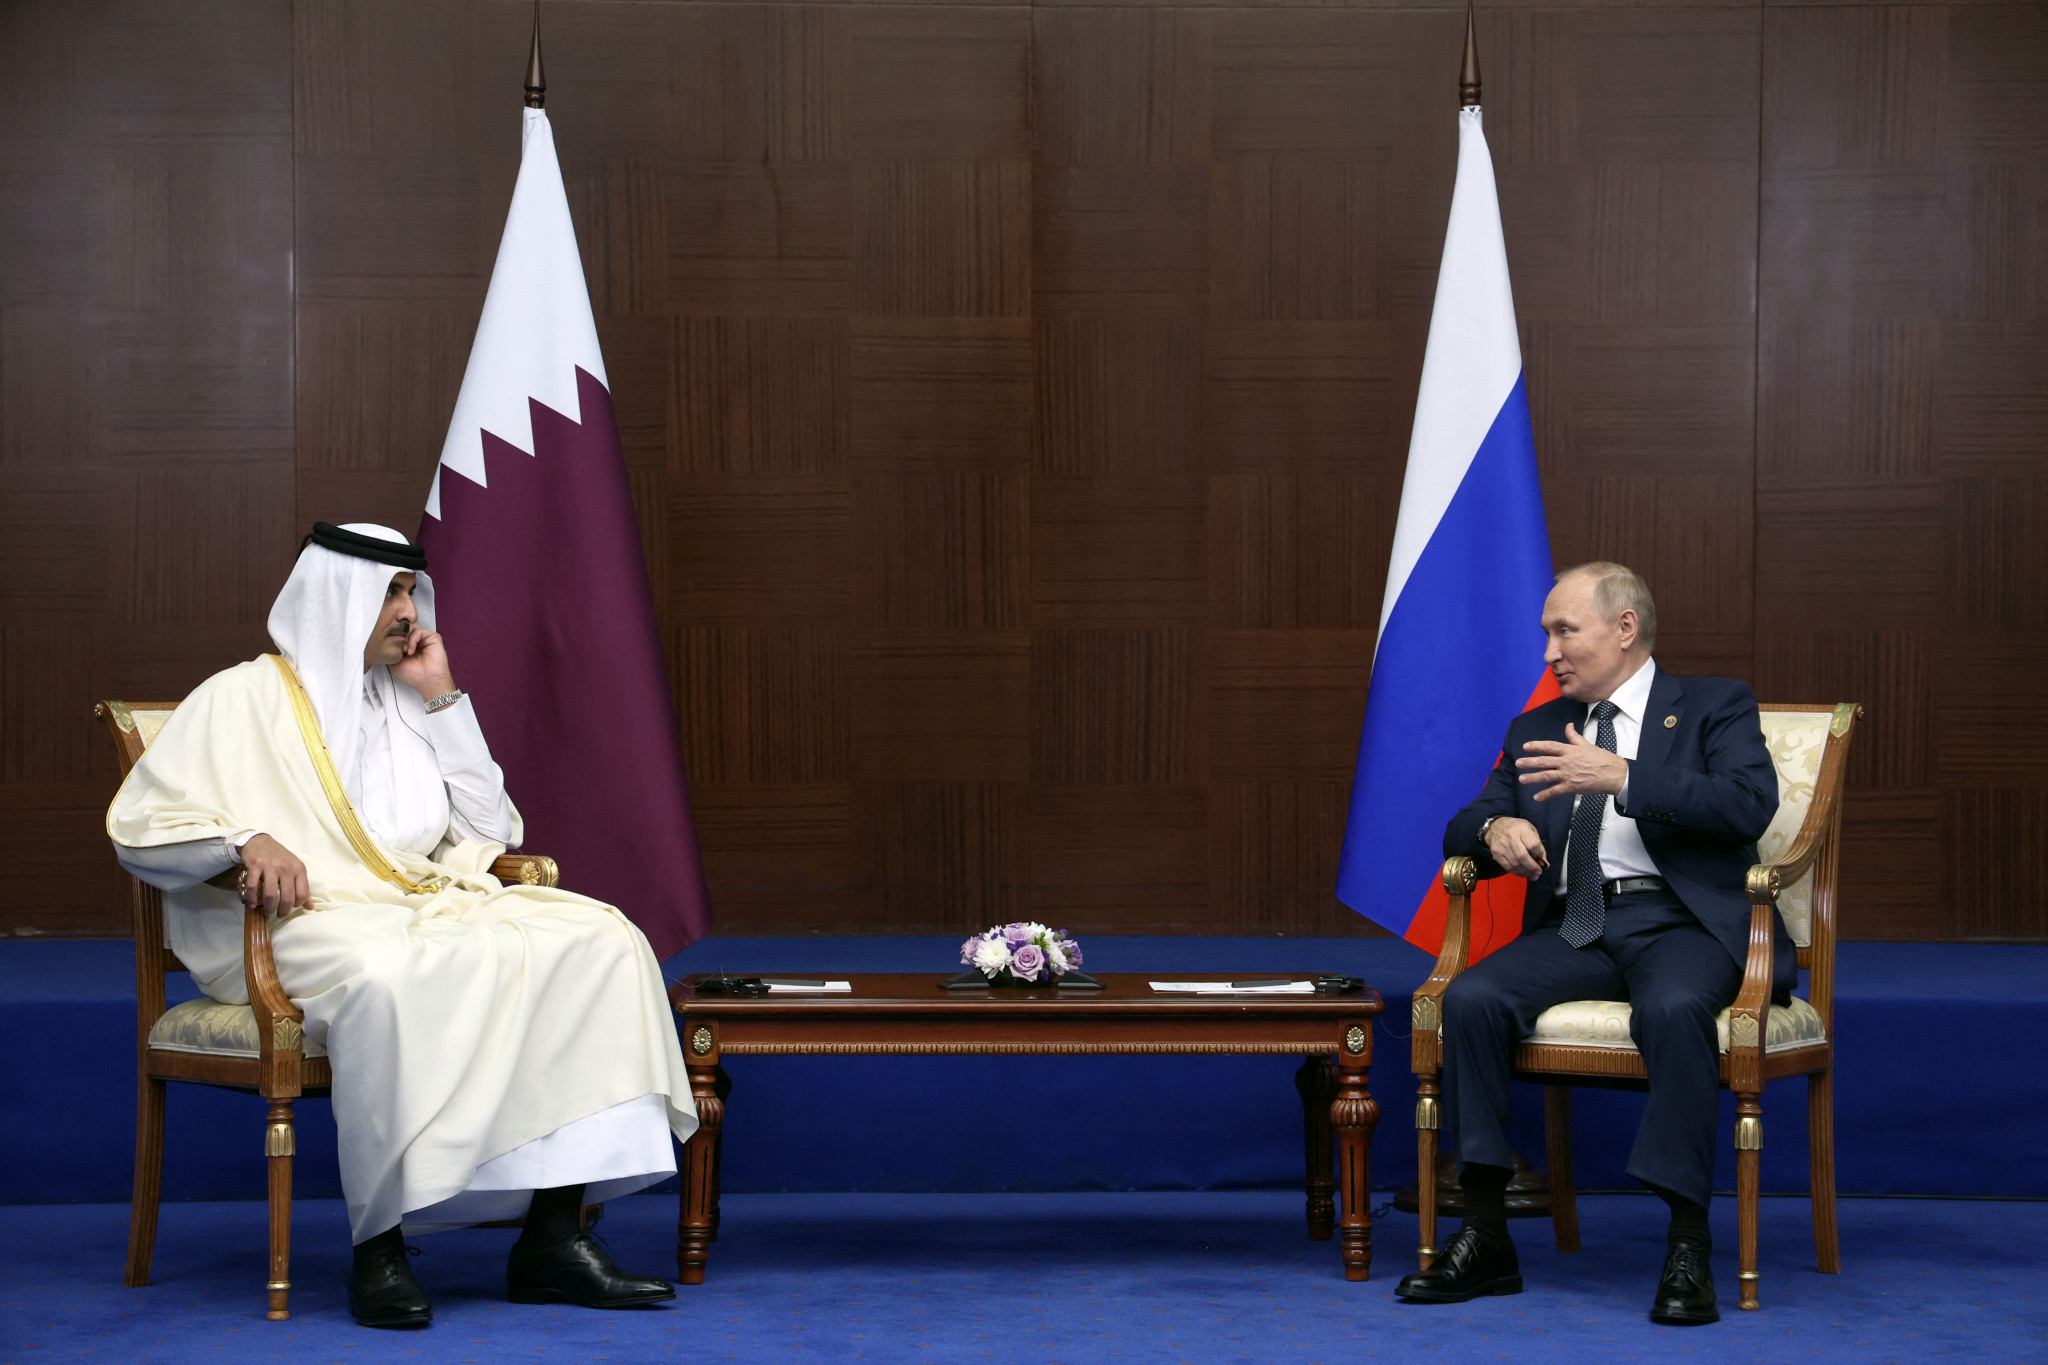 Qatari Emir praises Putin for Russia's support on staging World Cup